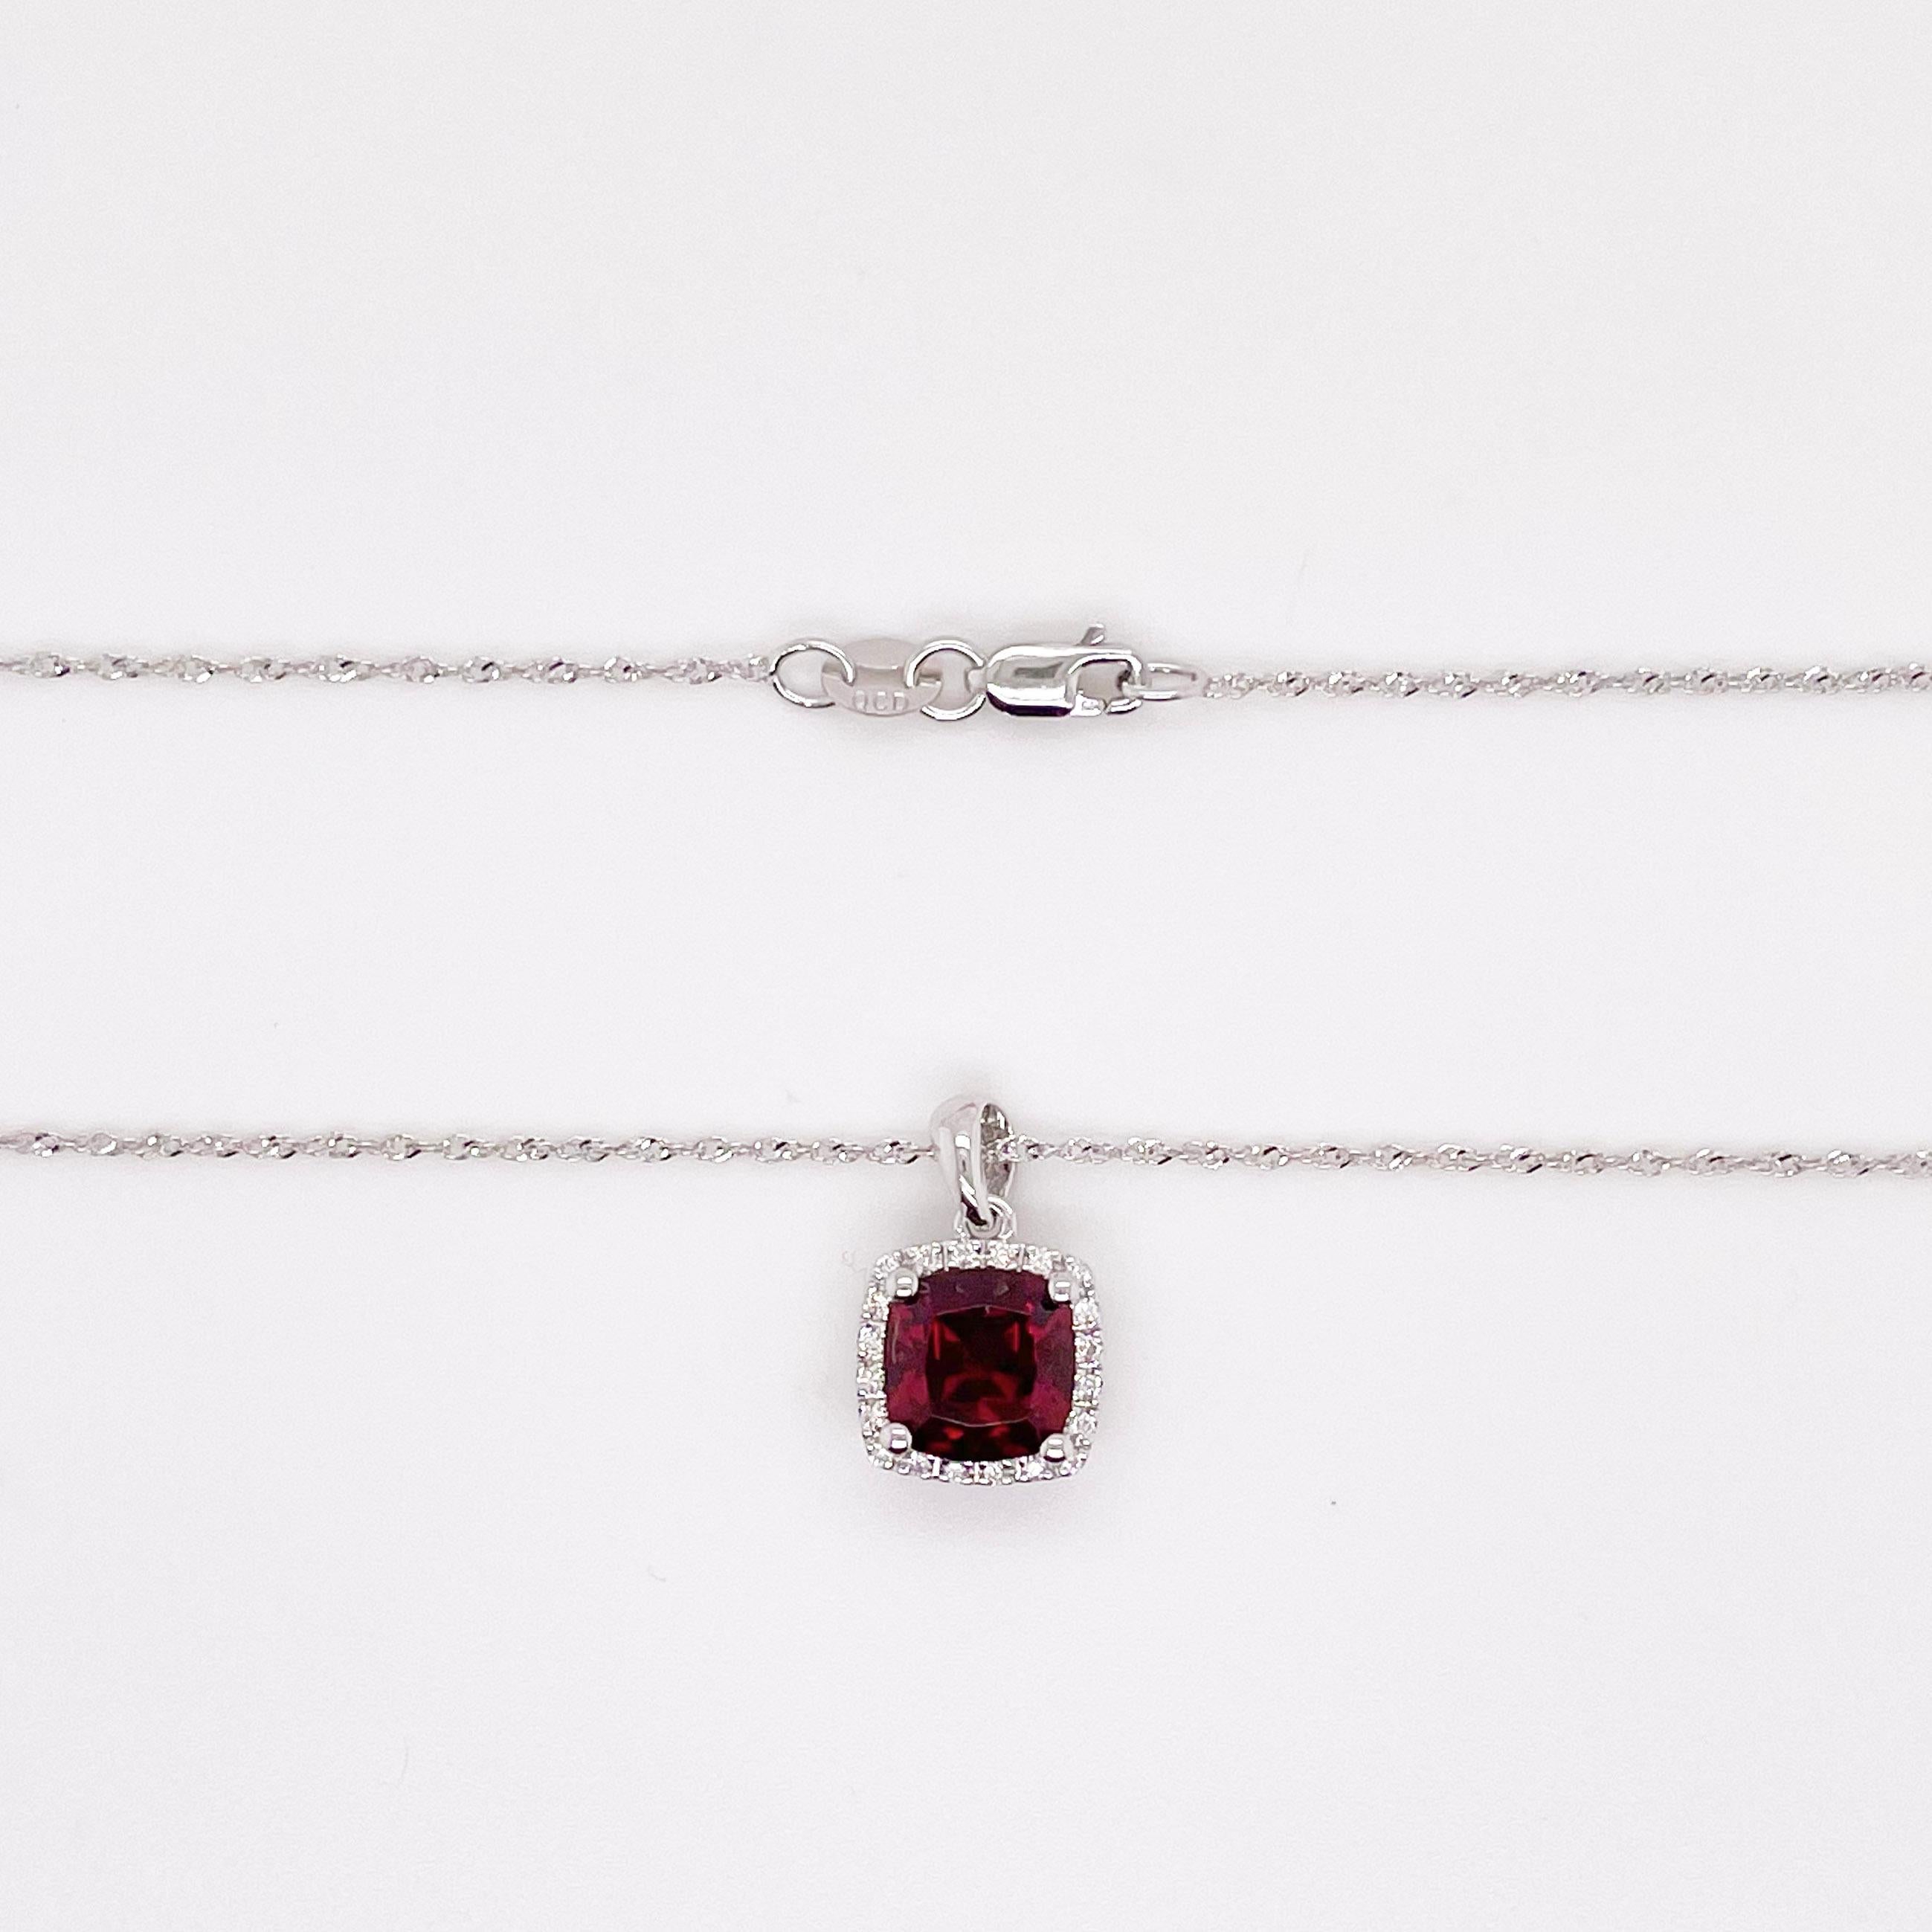 This deep red cushion-cut garnet is breathtaking and set beautifully within a diamond halo. This necklace was designed with a matching ring as shown in the pictures. These two make a stunning set that is the perfect addition to any jewelry